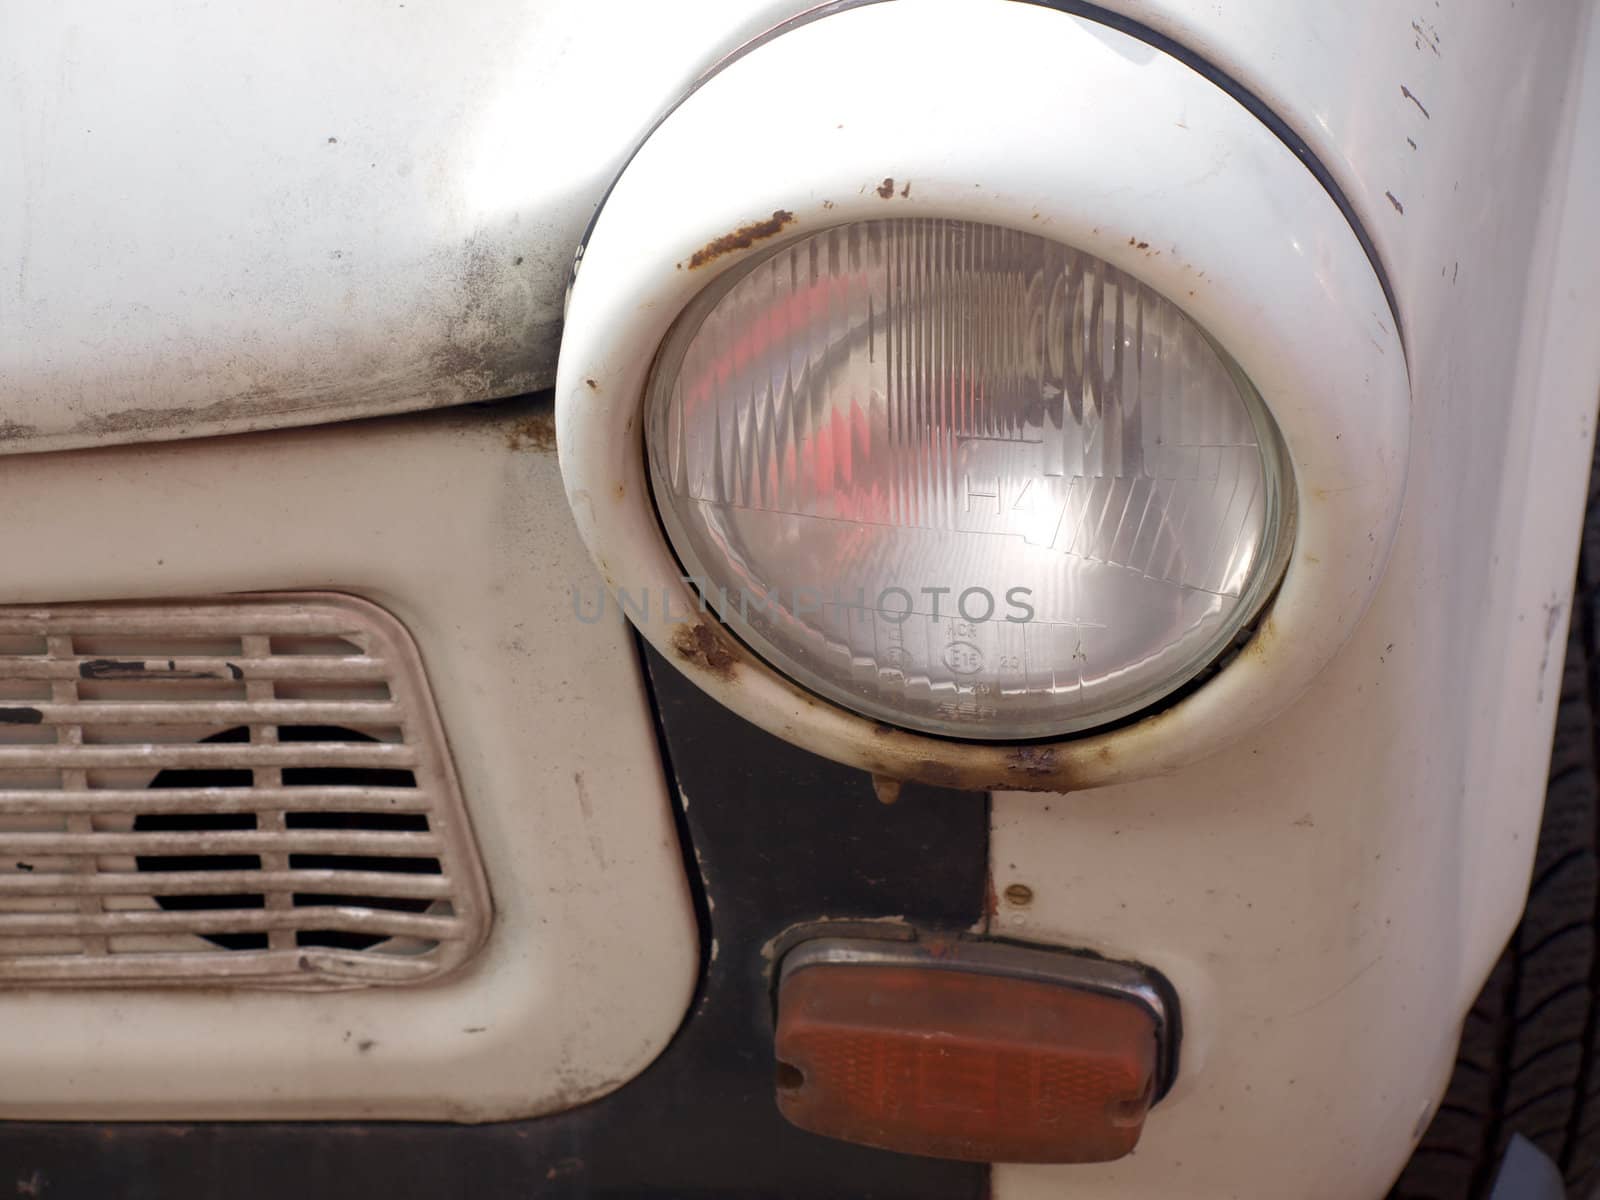 trbant, the immortal car from east germany, detail of lights, front side